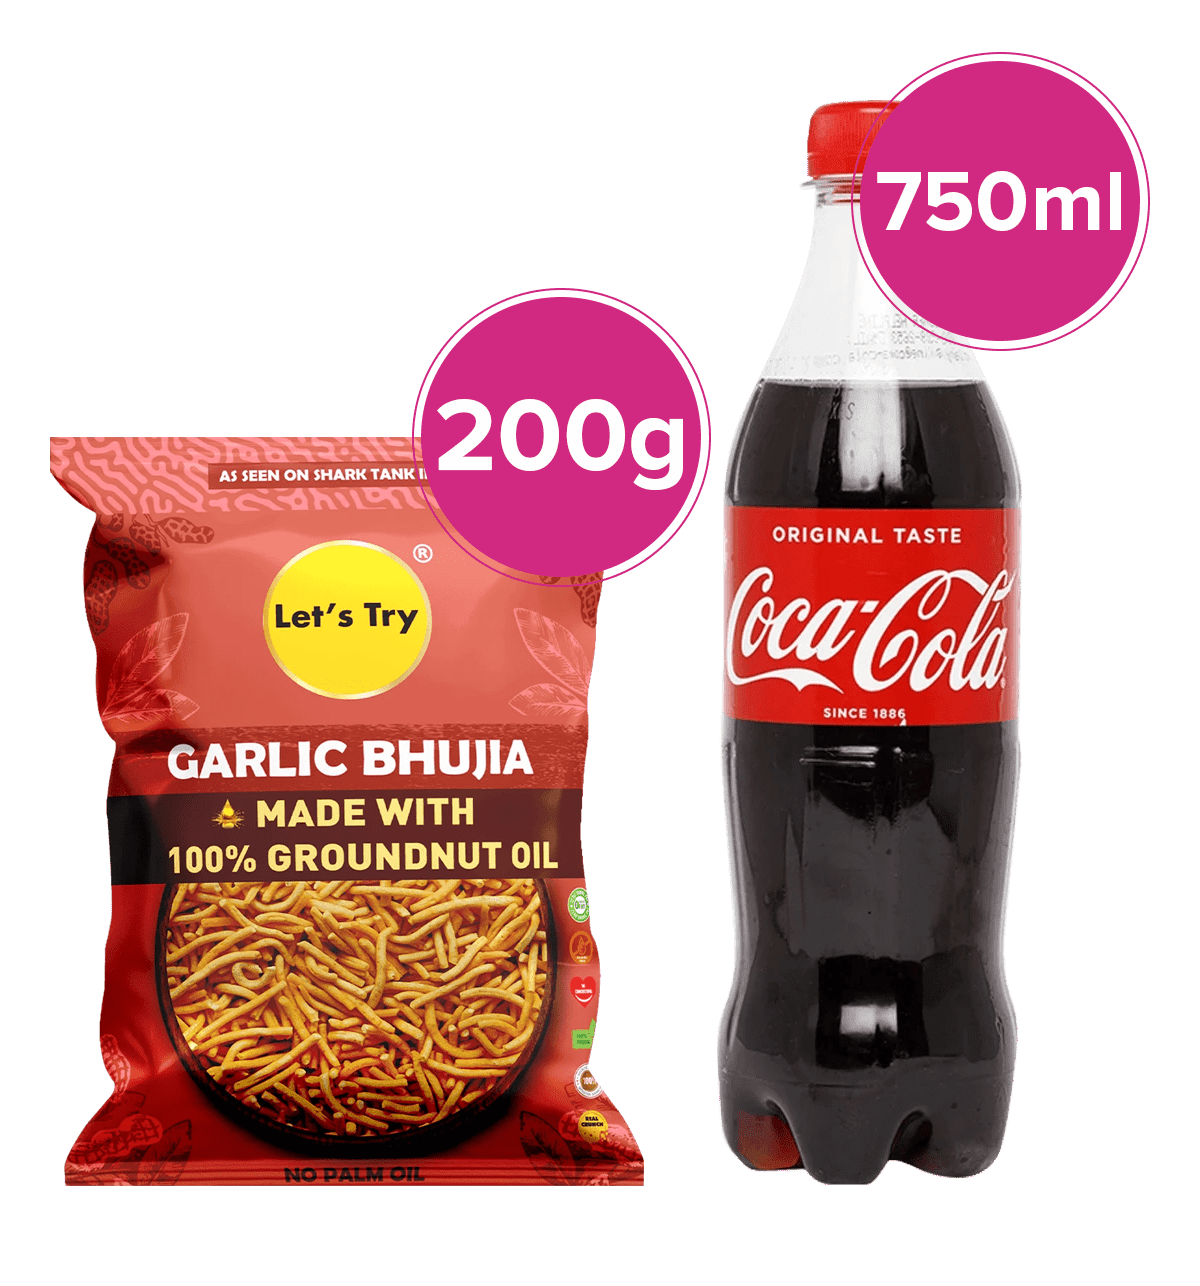 Buy Lets Try Lets Try Garlic Bhujia Coca Cola Bottle 1 Combo Online At